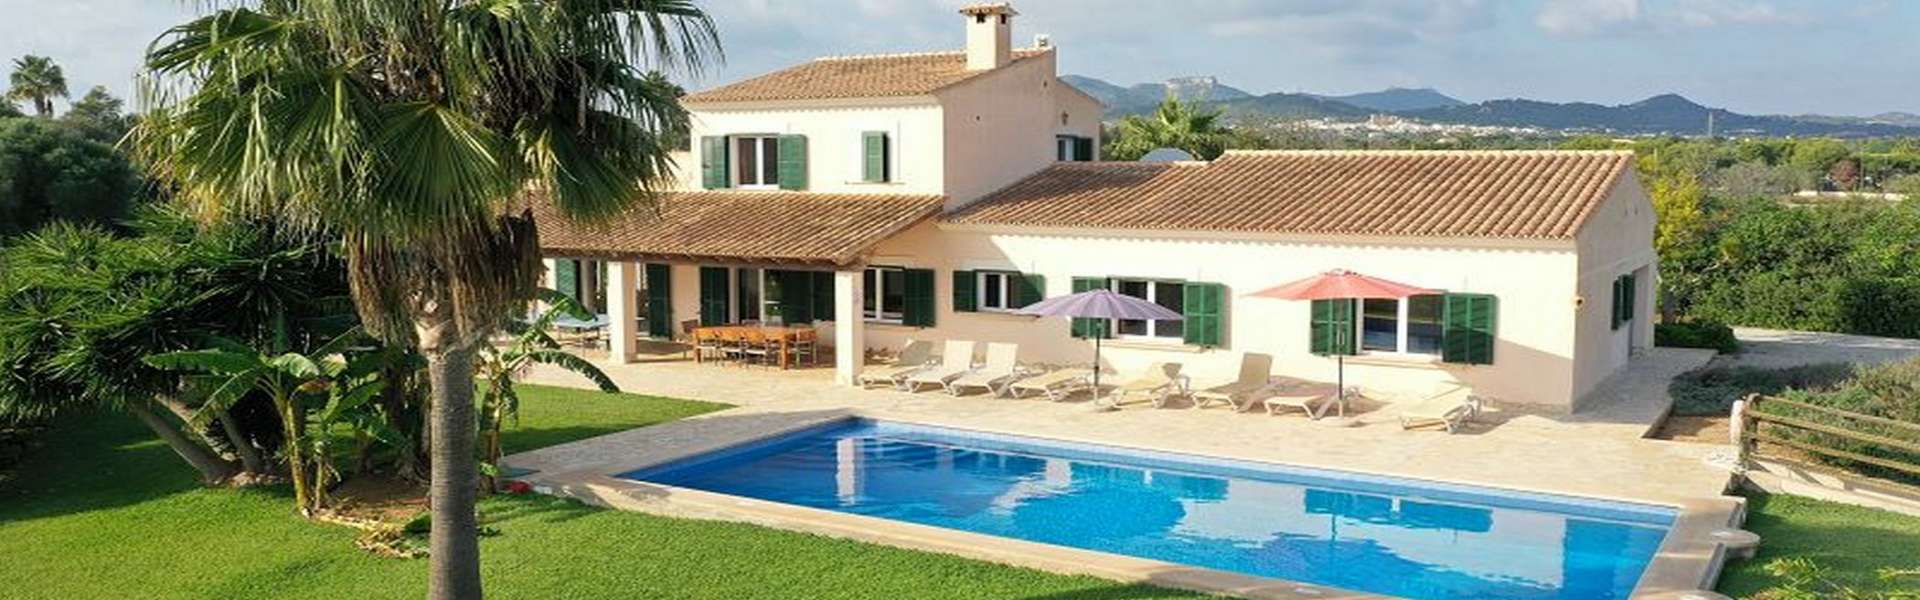 Nice country house with licence for holiday rental in Cala d'Or